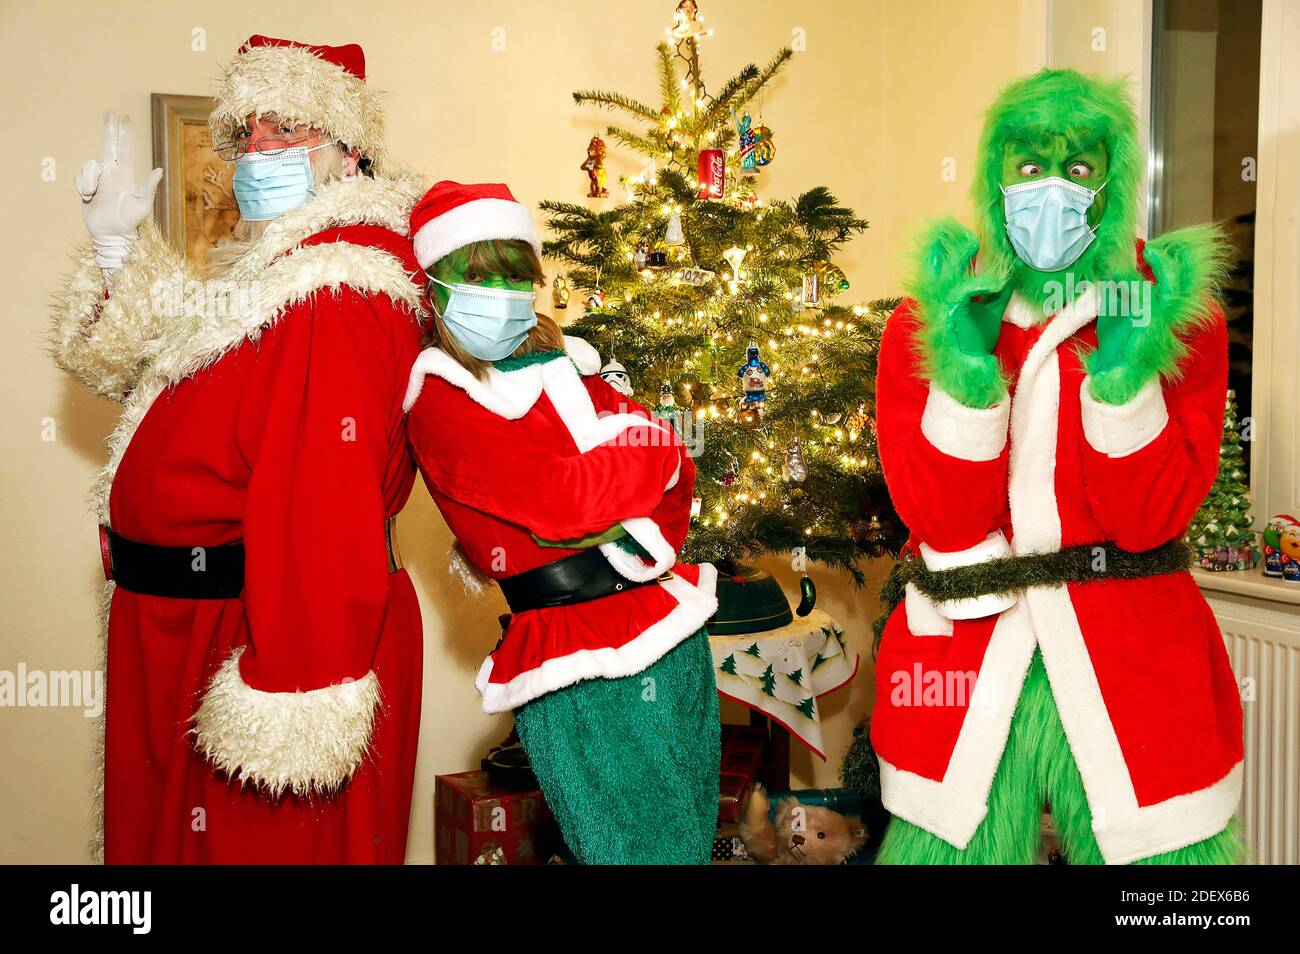 The Weihaftertsmann convinced the Grinch and Mrs. Grinch to wear a protective mask. GEEK ART - Bodypainting and Transformaking: 'The Grinch steals Weihafterten' Photoshooting with Enrico Lein as Grinch, Maria Skupin as Frau Grinch and Fabian Zesiger as Weihaftertmann in the Villa Czarnecki. Hamelin, November 30th, 2020 - A project by the photographer Tschiponnique Skupin and the body painter and transformaker Enrico Lein | usage worldwide Stock Photo